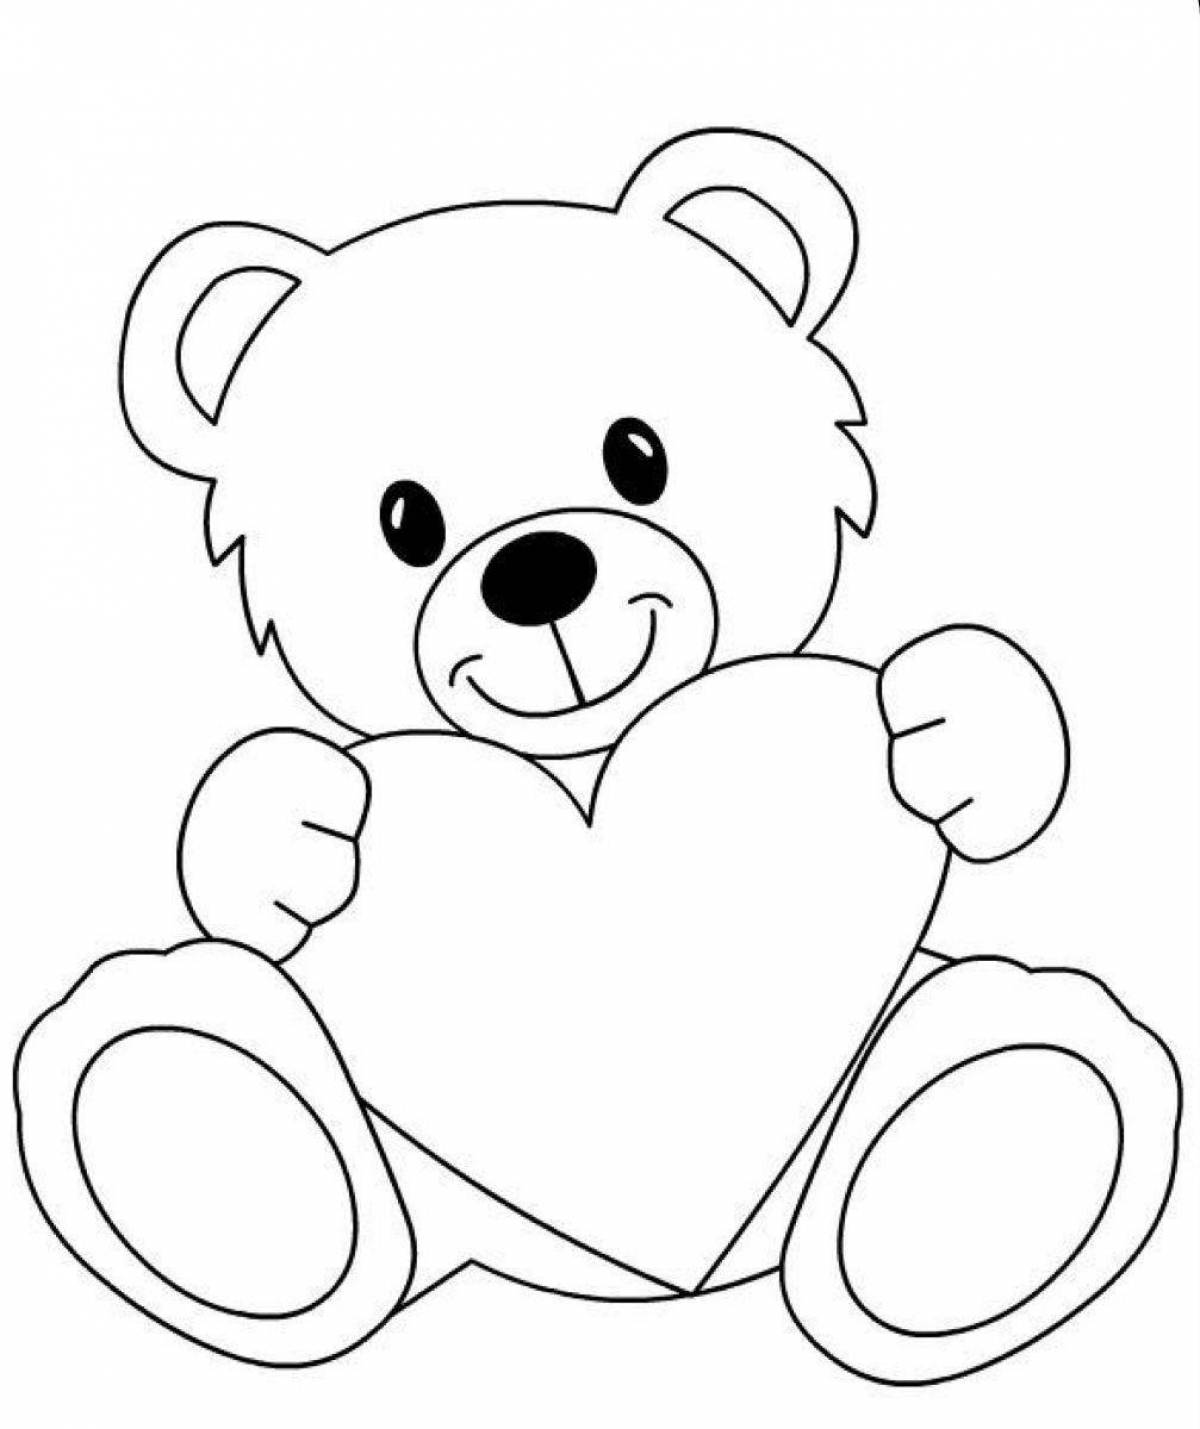 Colorful teddy bear coloring book